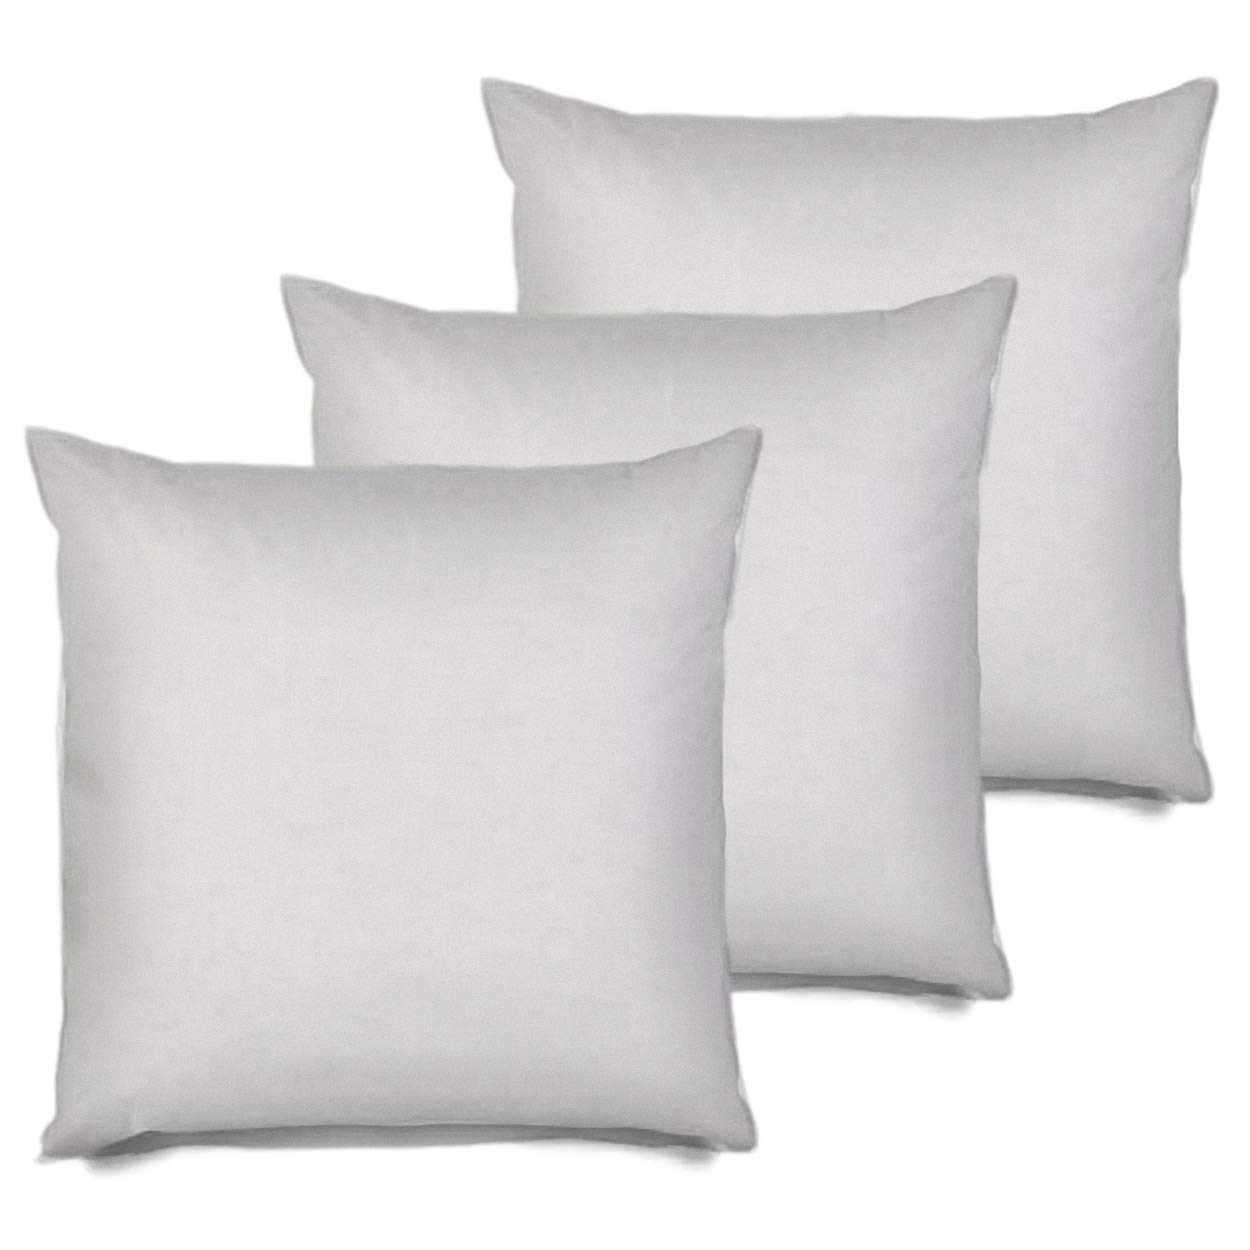 Book Cover MSD 3 Pack Pillow Insert 28x28 Hypoallergenic Square Form Sham Stuffer Standard White Polyester Decorative Euro Throw Pillow Inserts for Sofa Bed - Made in USA (Set of 3) - Machine Washable and Dry 3 28 Inches